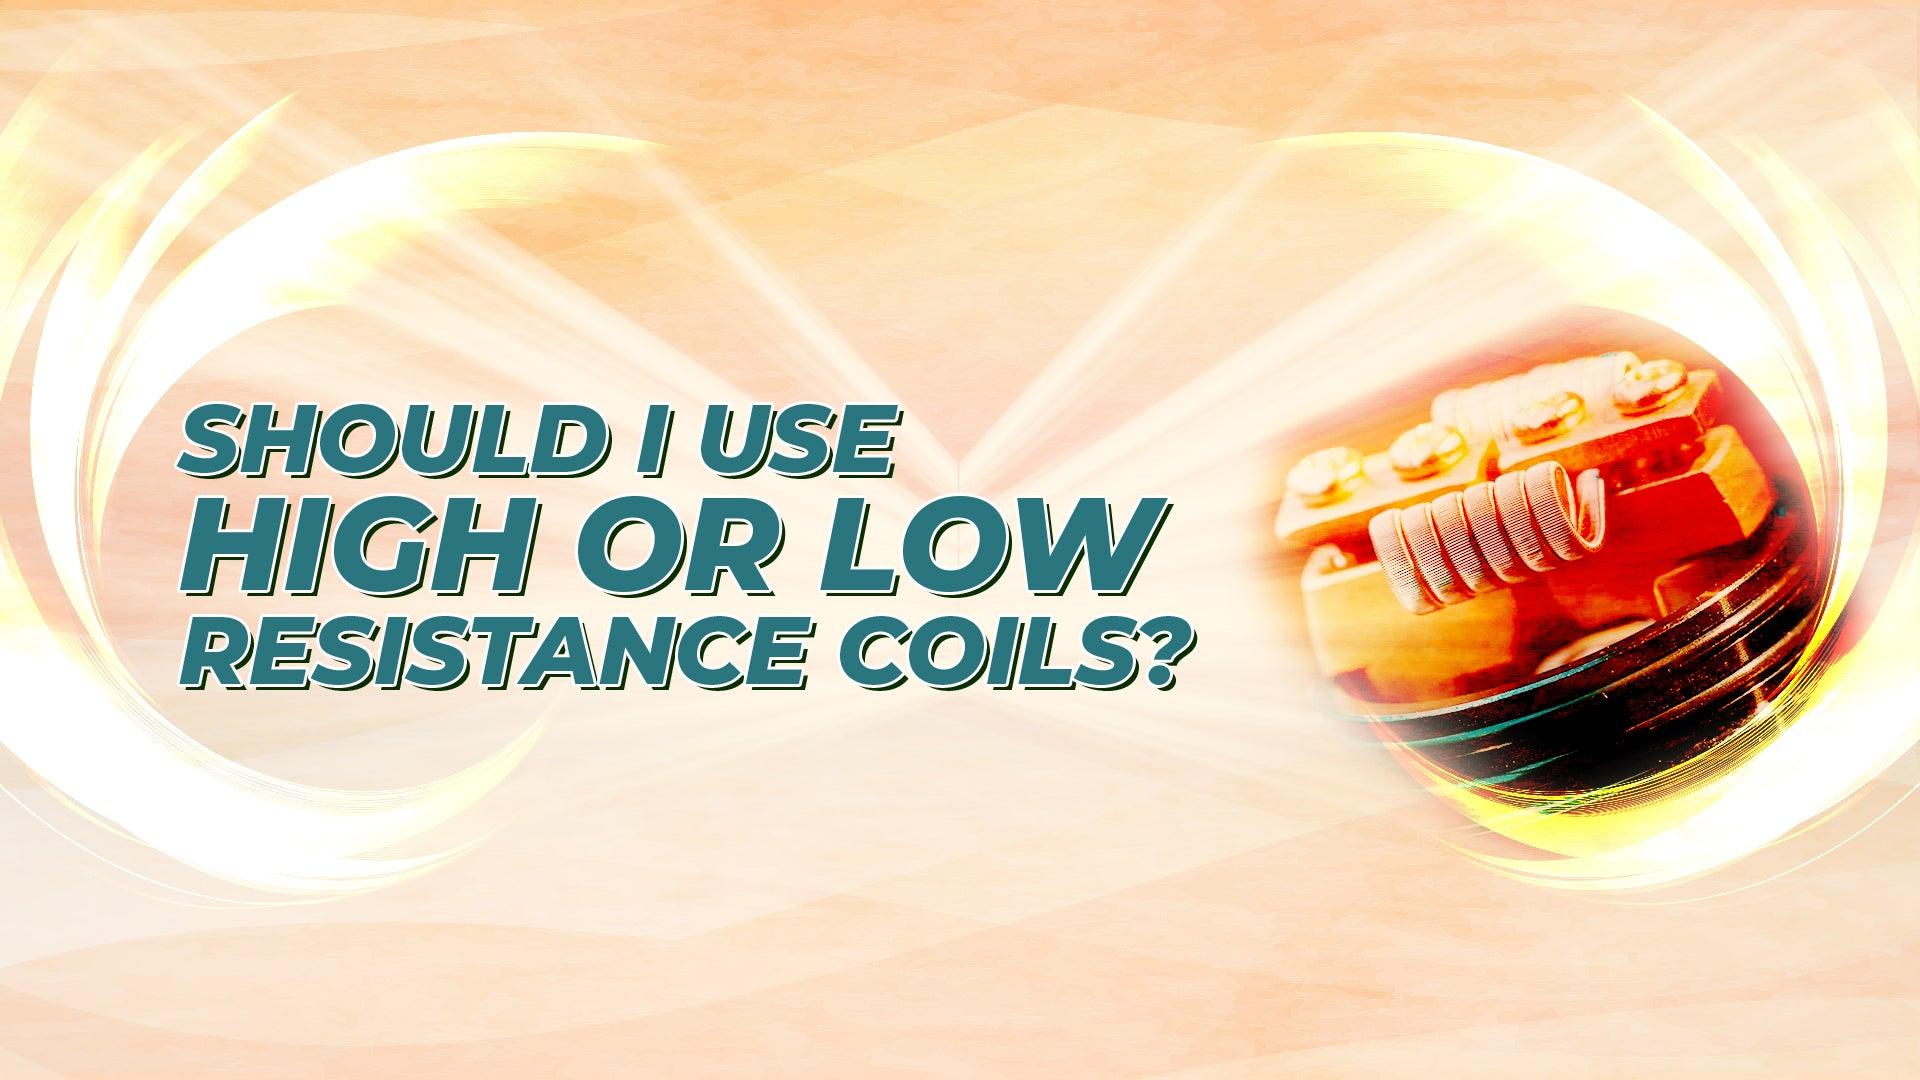 Should I Use 
High or Low Resistance Coils
? - Category:Coils, Sub Category:Coil Materials